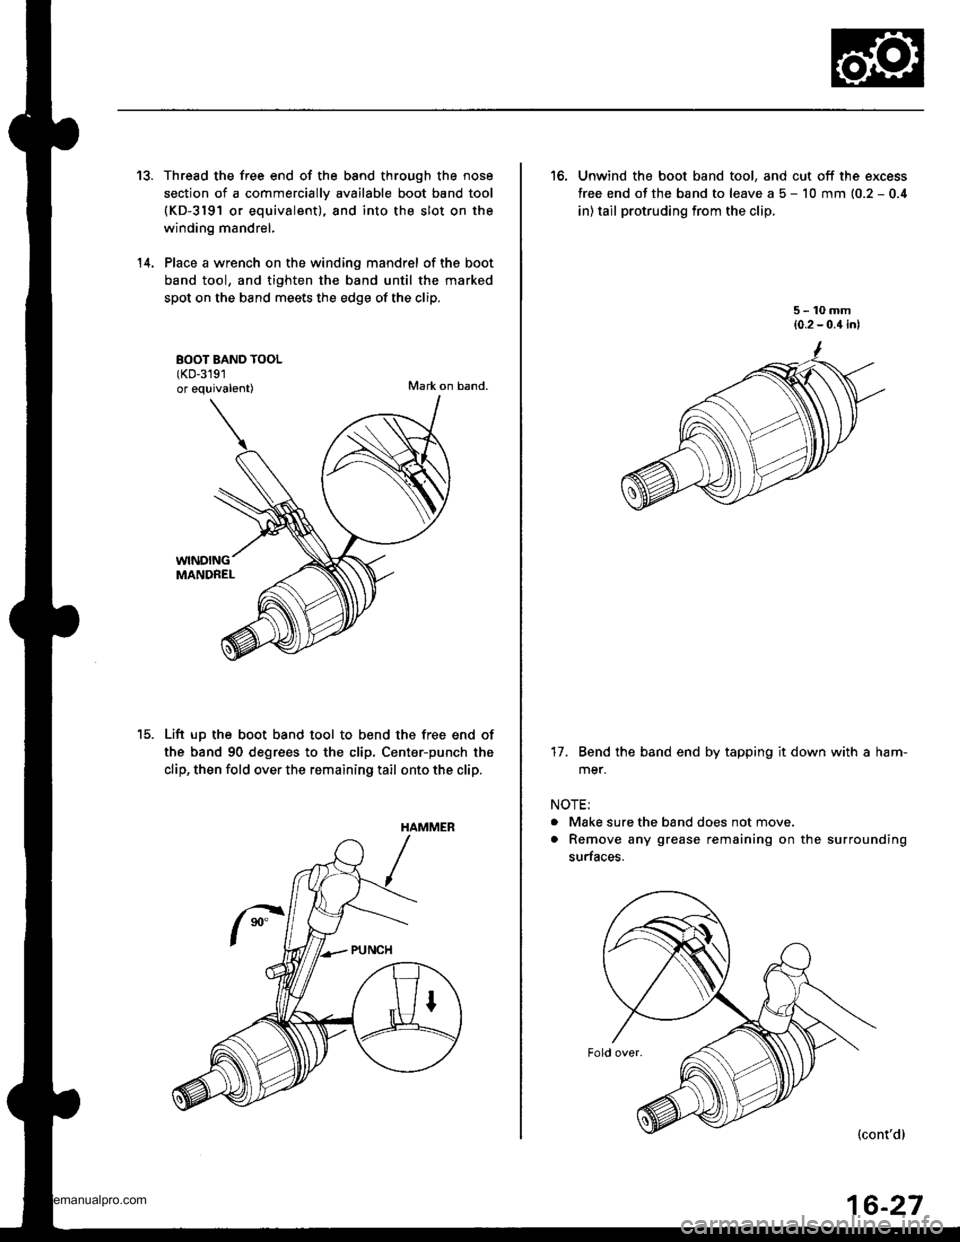 HONDA CR-V 1999 RD1-RD3 / 1.G Workshop Manual 
13.
14.
Thread the free end of the band through the nose
section of a commerciallv available boot band tool(KD-3191 or equivalent), and into the slot on the
winding mandrel,
Place a wrench on the win